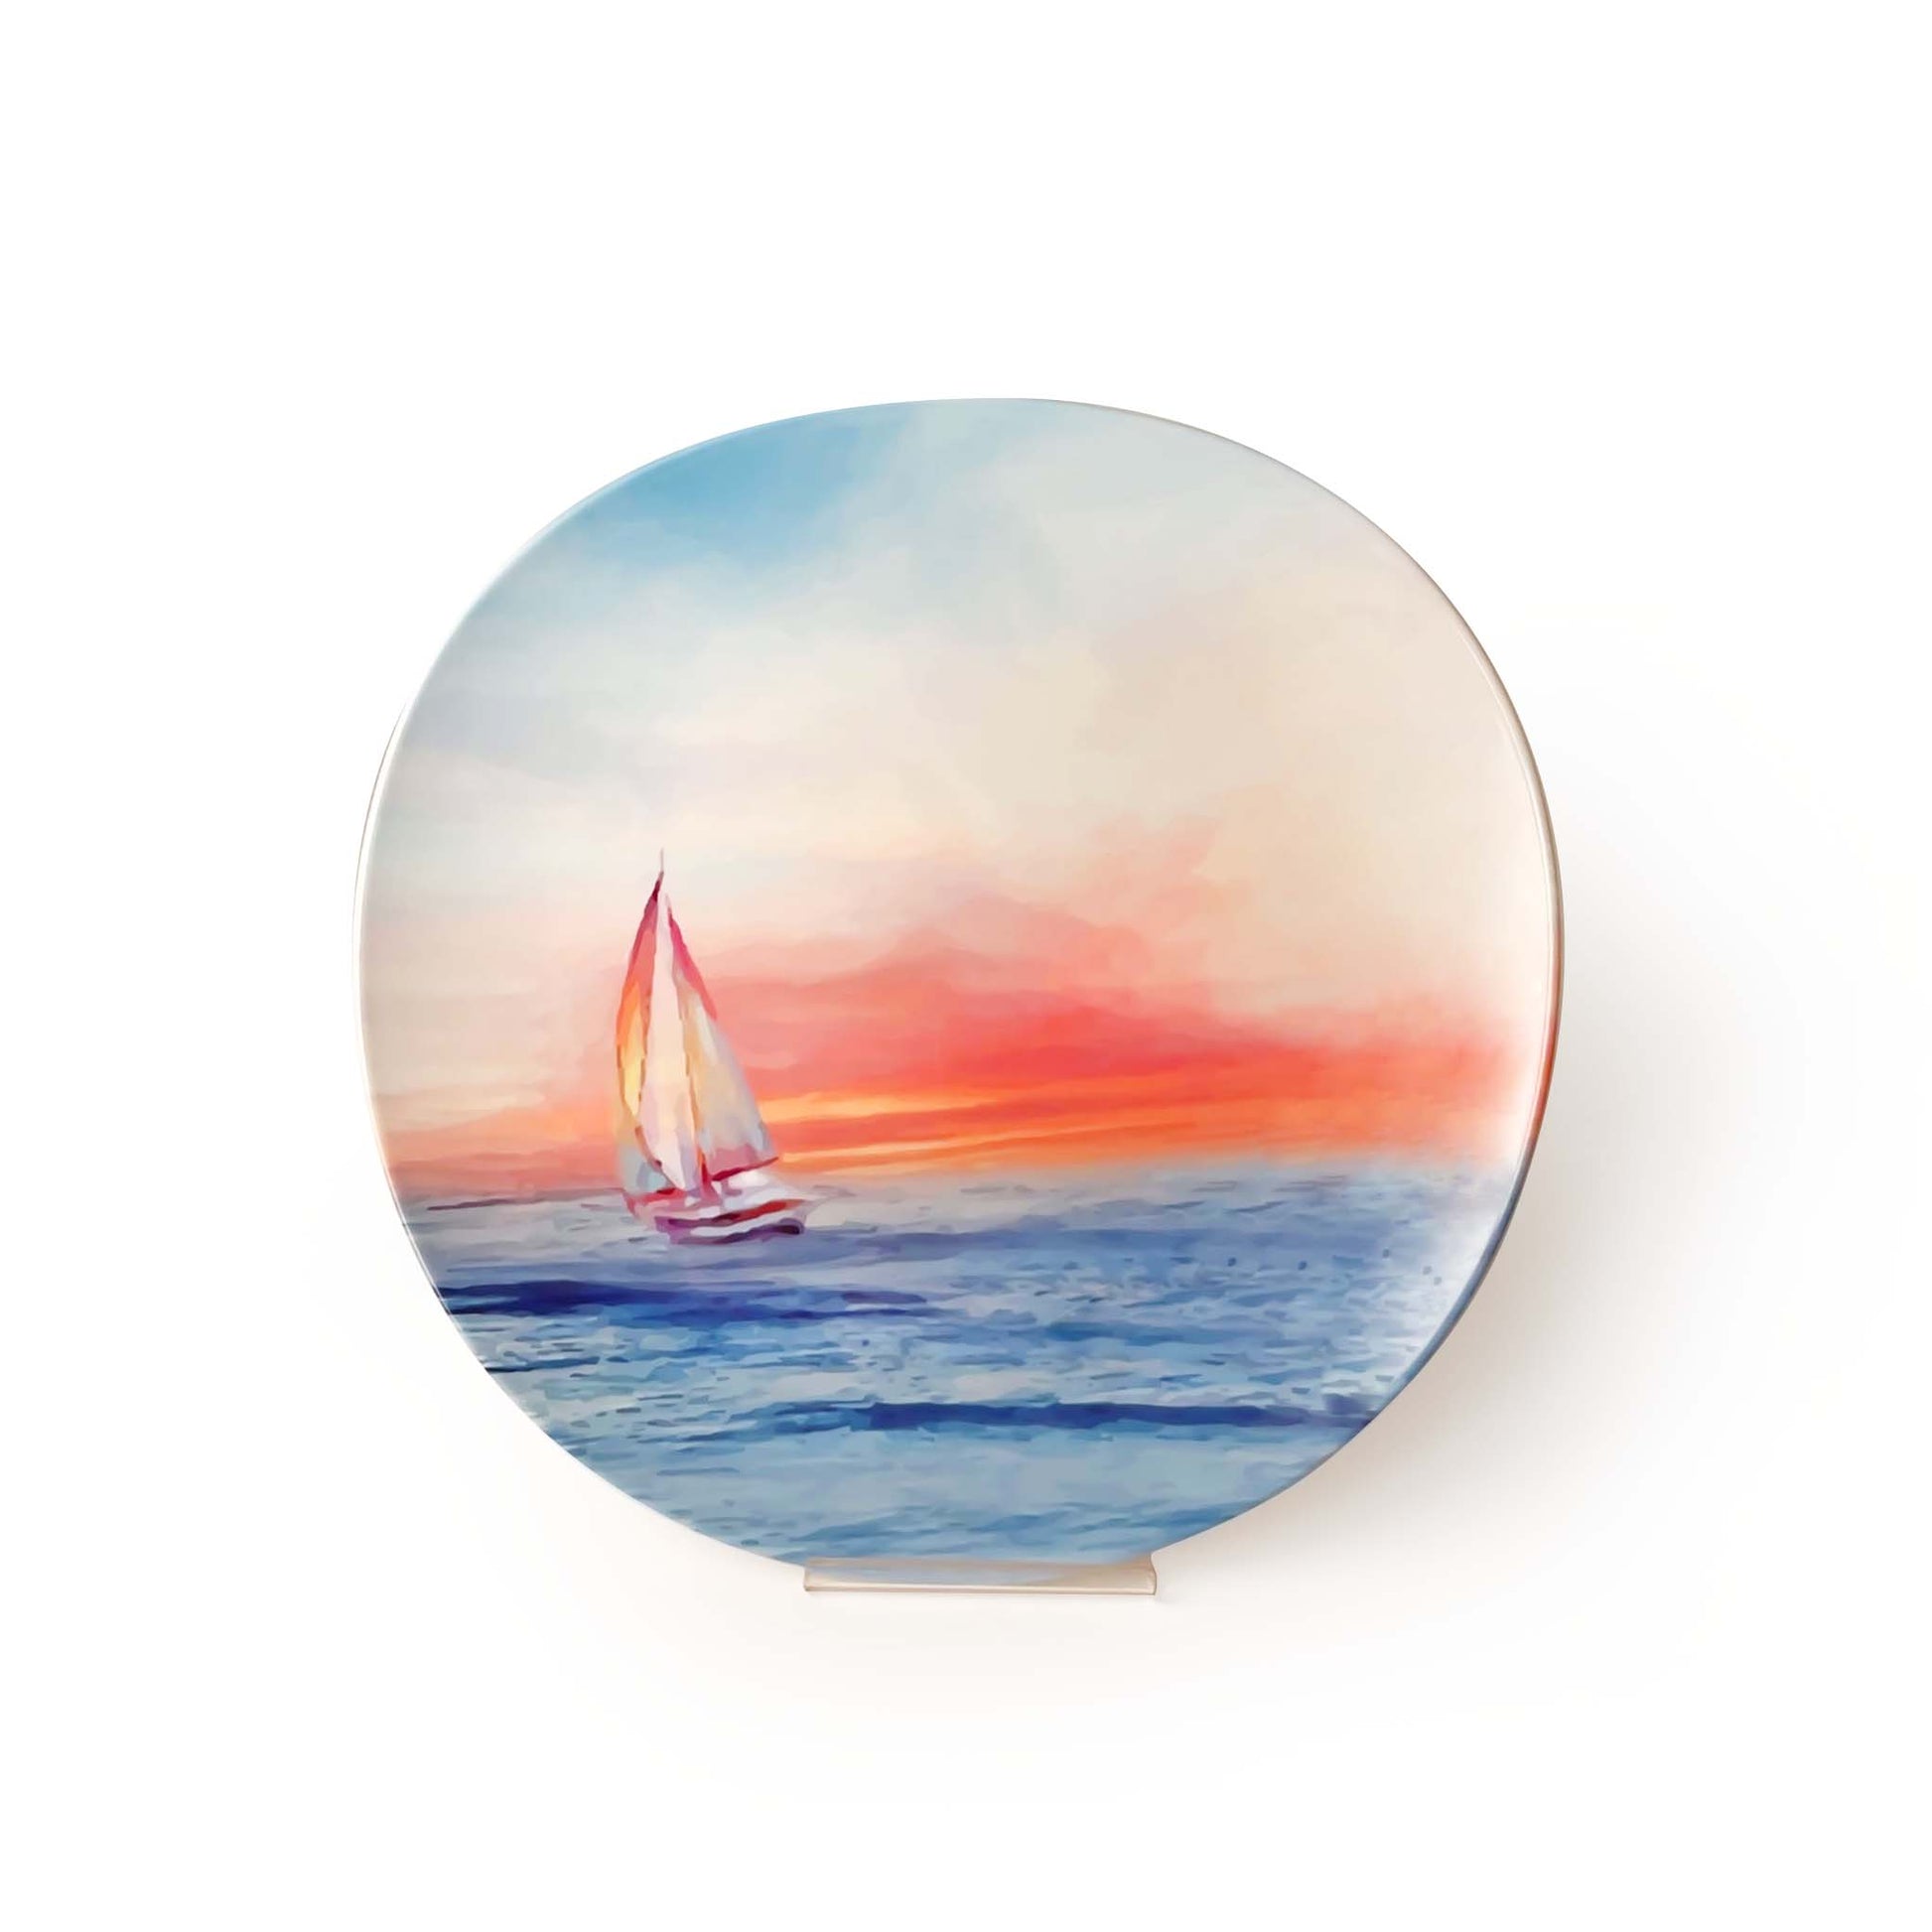 The Plate Story - 2 Pcs Dinner Plates - The Magic Hour